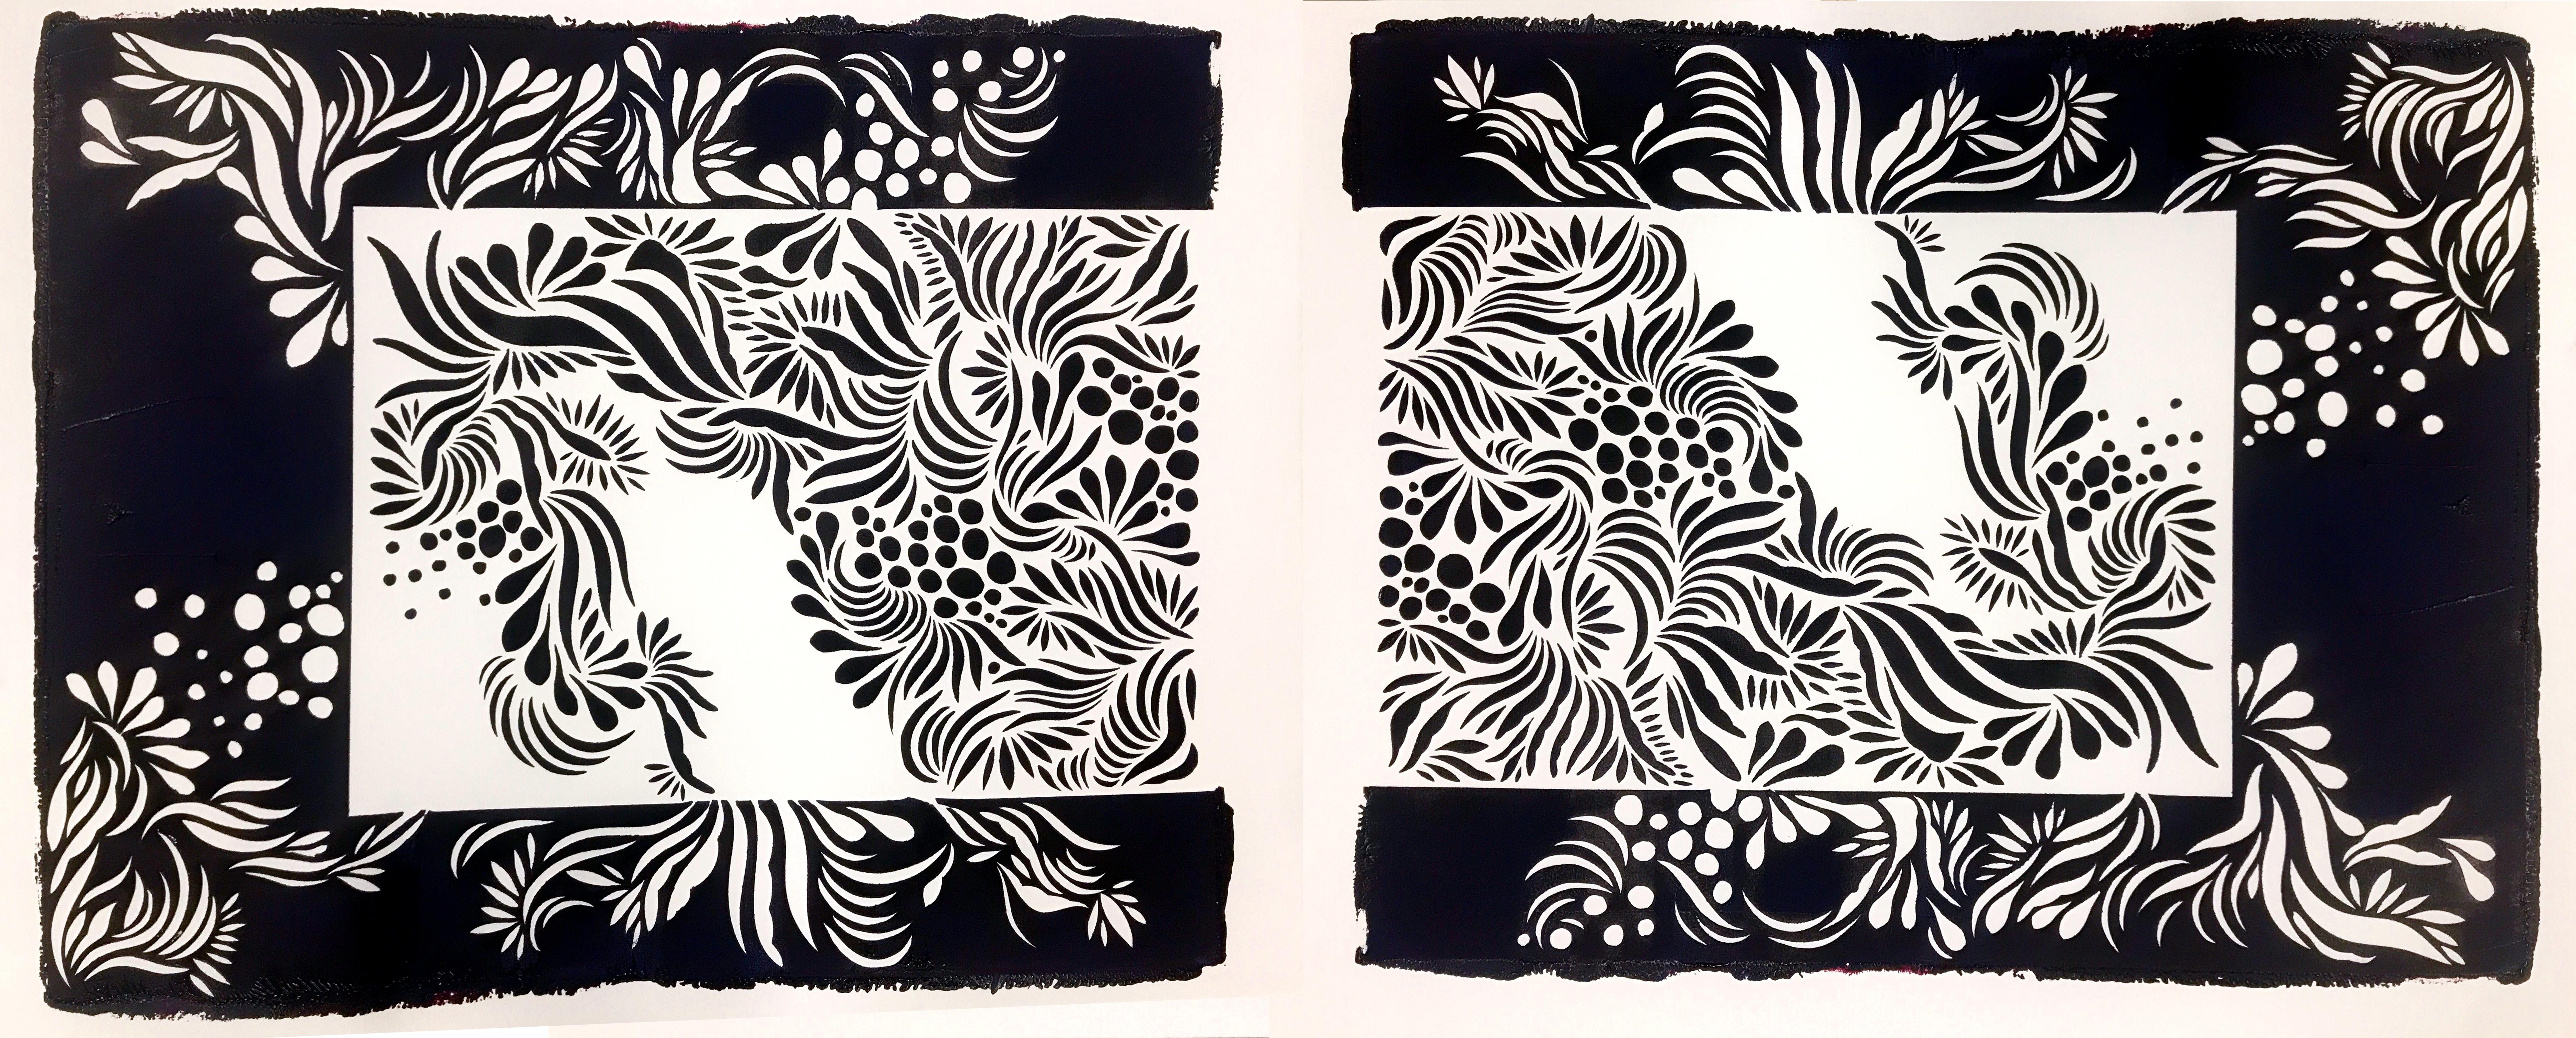 Contemporary Hand cut and pulled screen prints black and white floral abstract